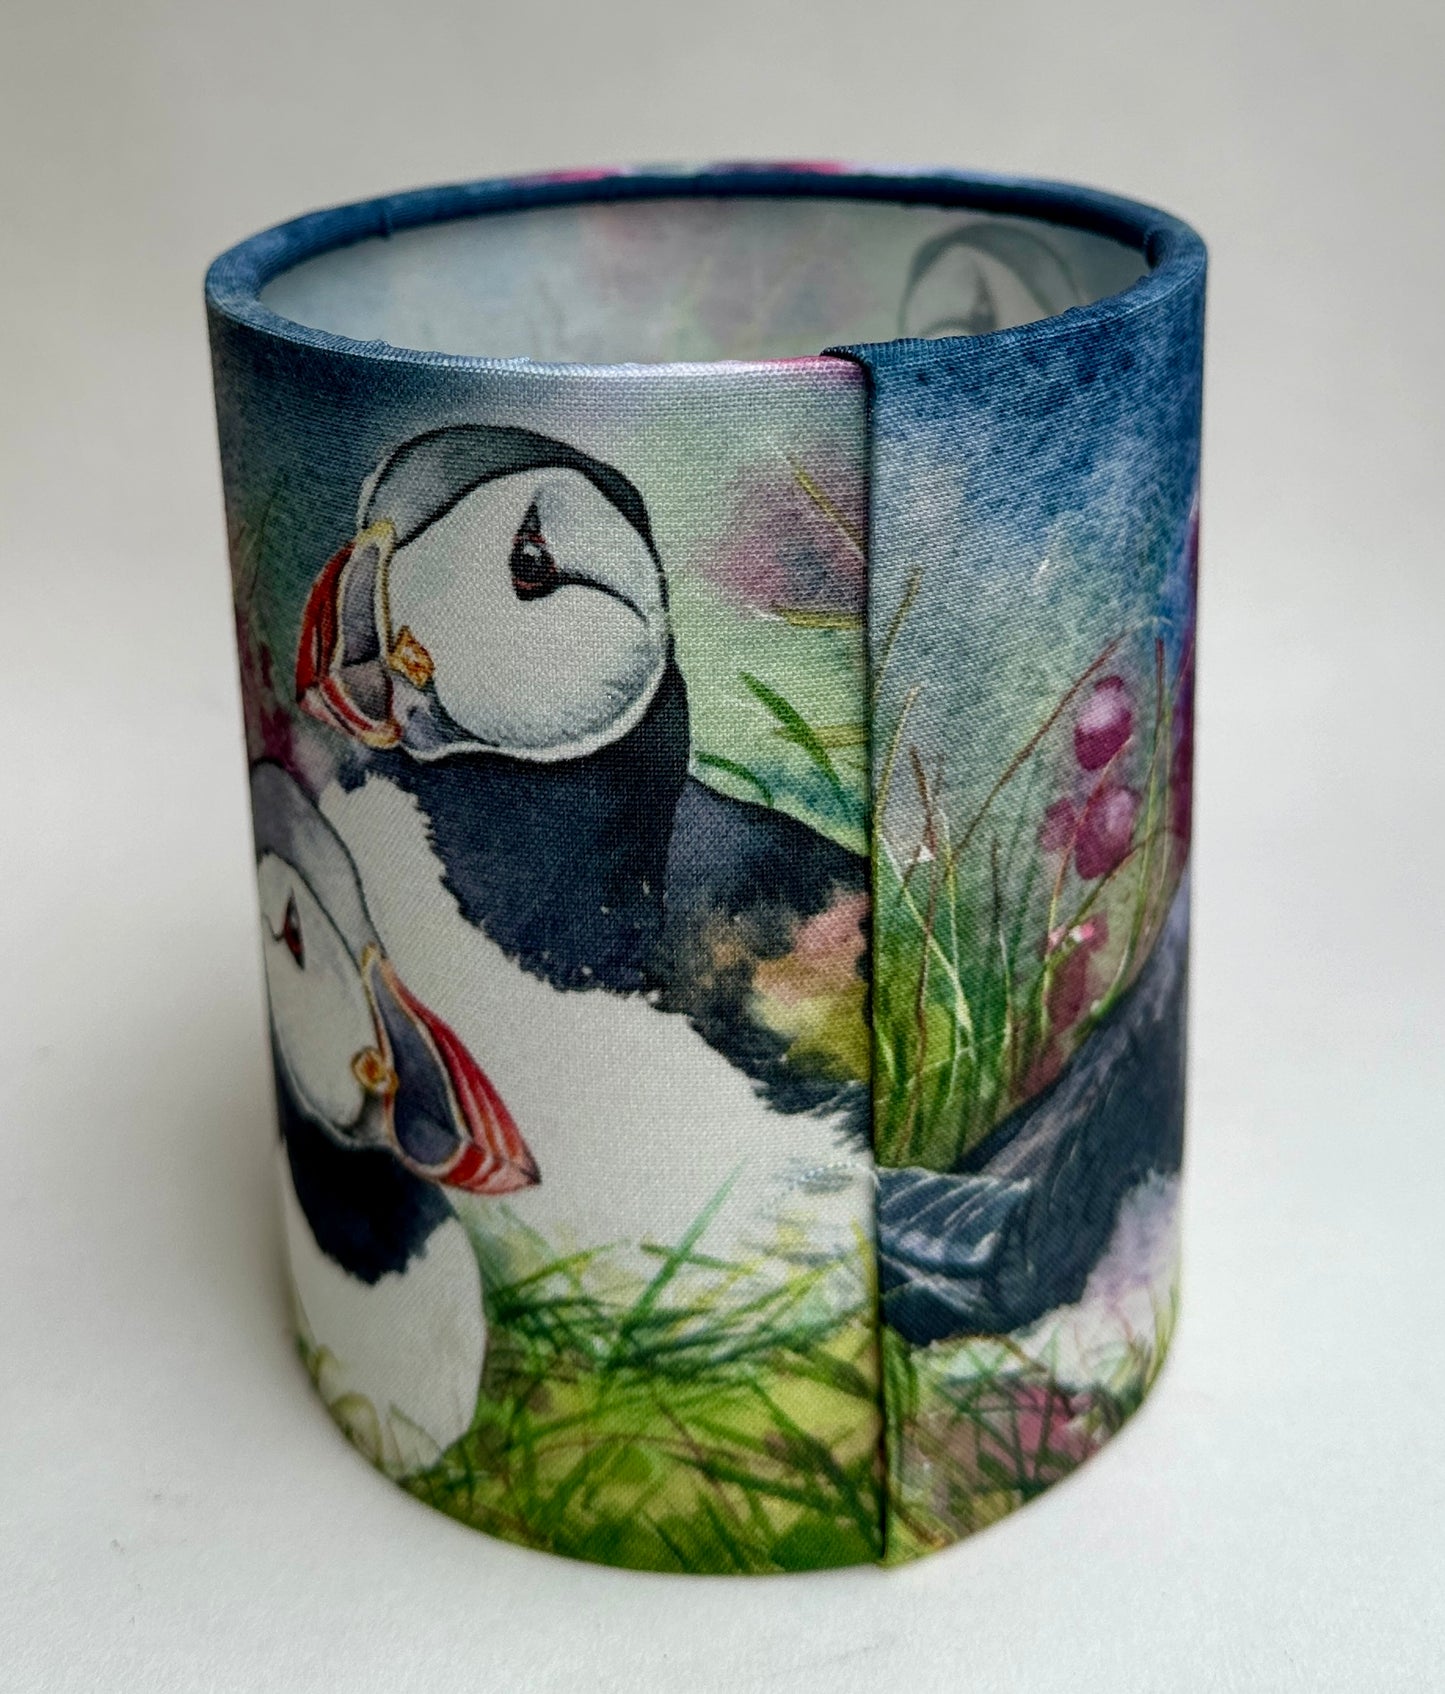 Small candle lamp/Tammie norries(puffins)